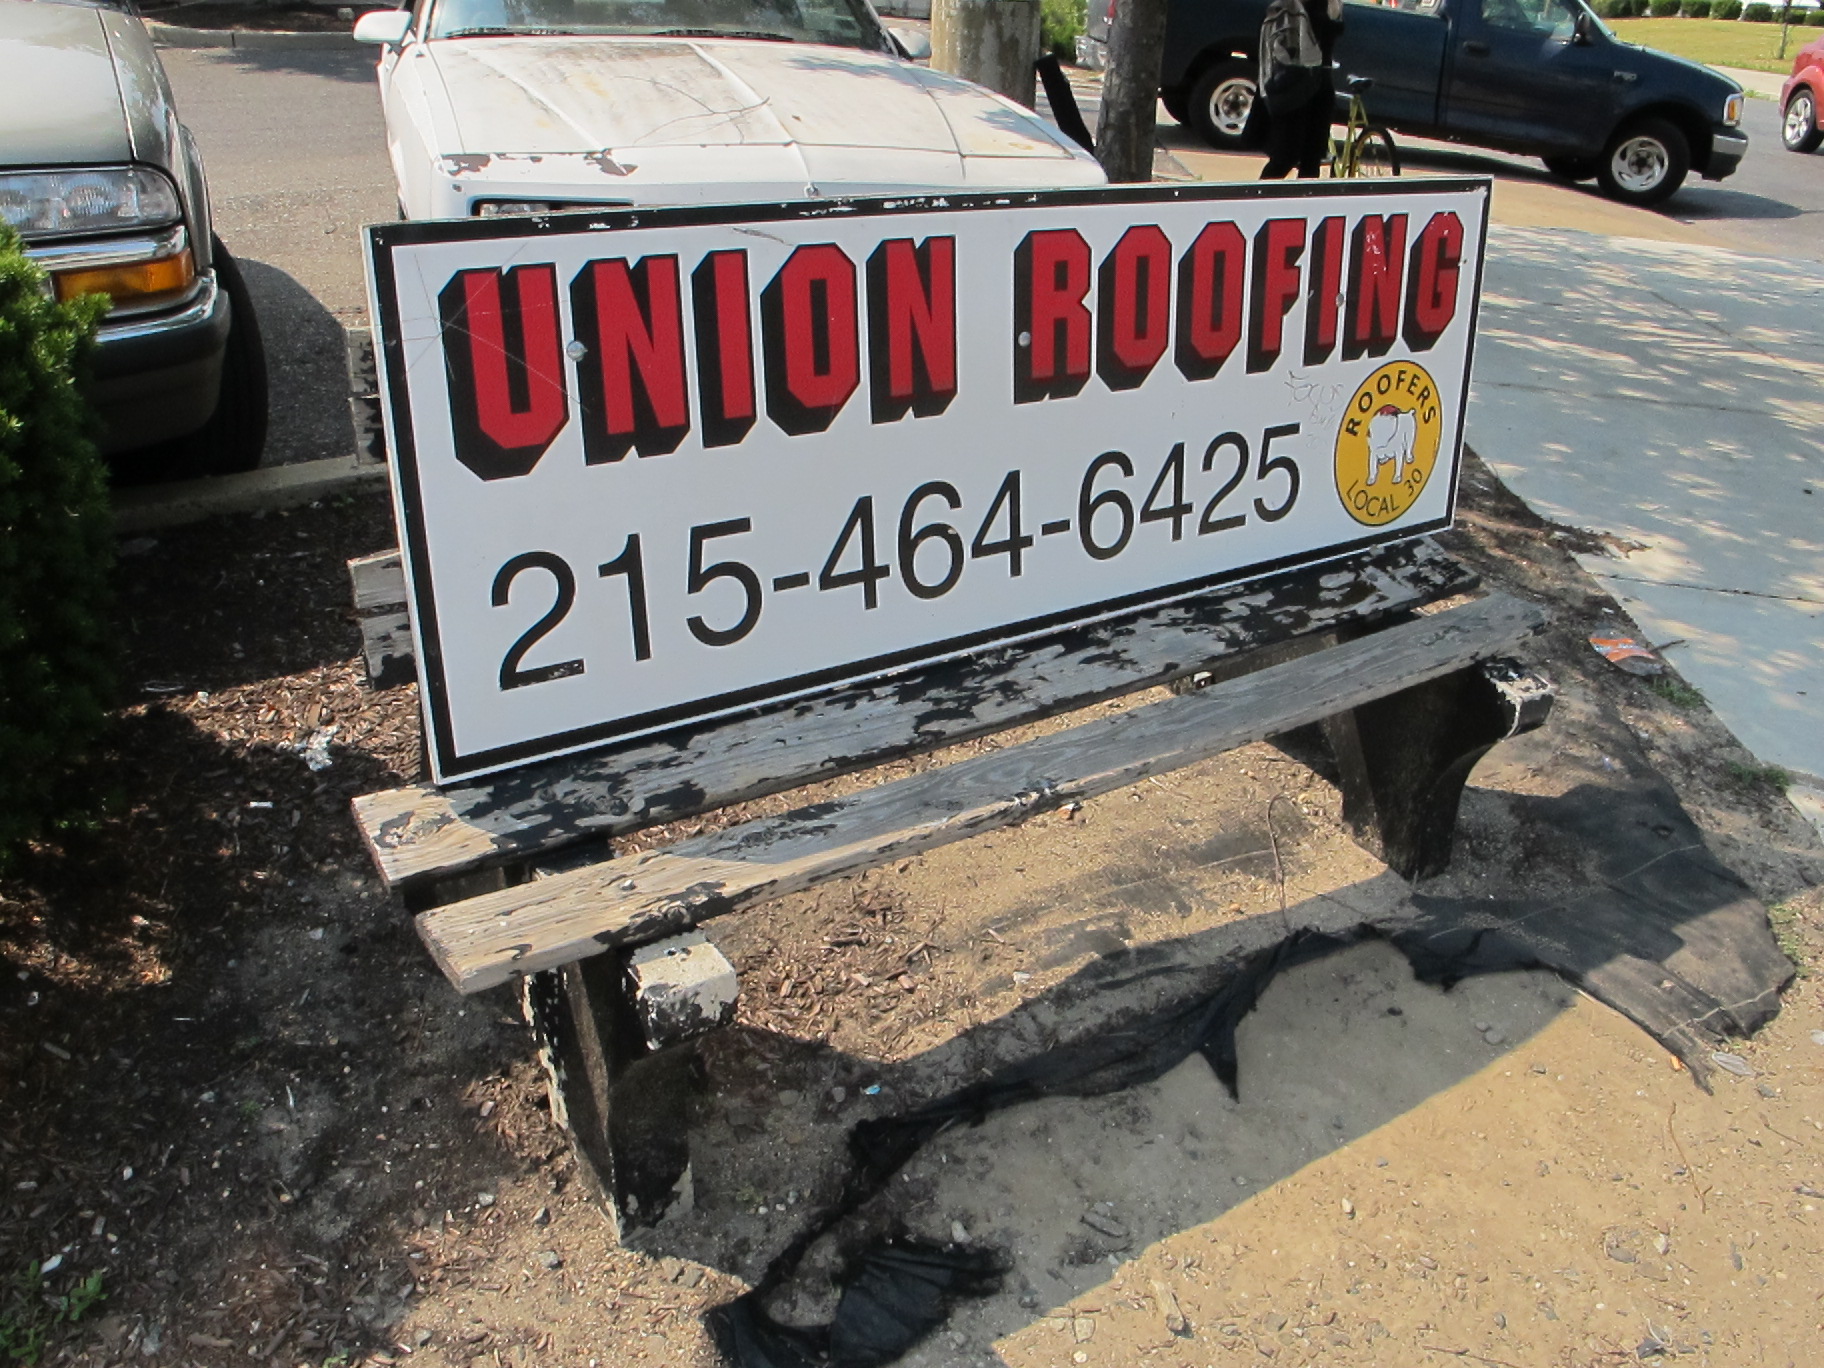 Decrepit Union Roofing bench on Aramingo Ave, June 2012. (removed)